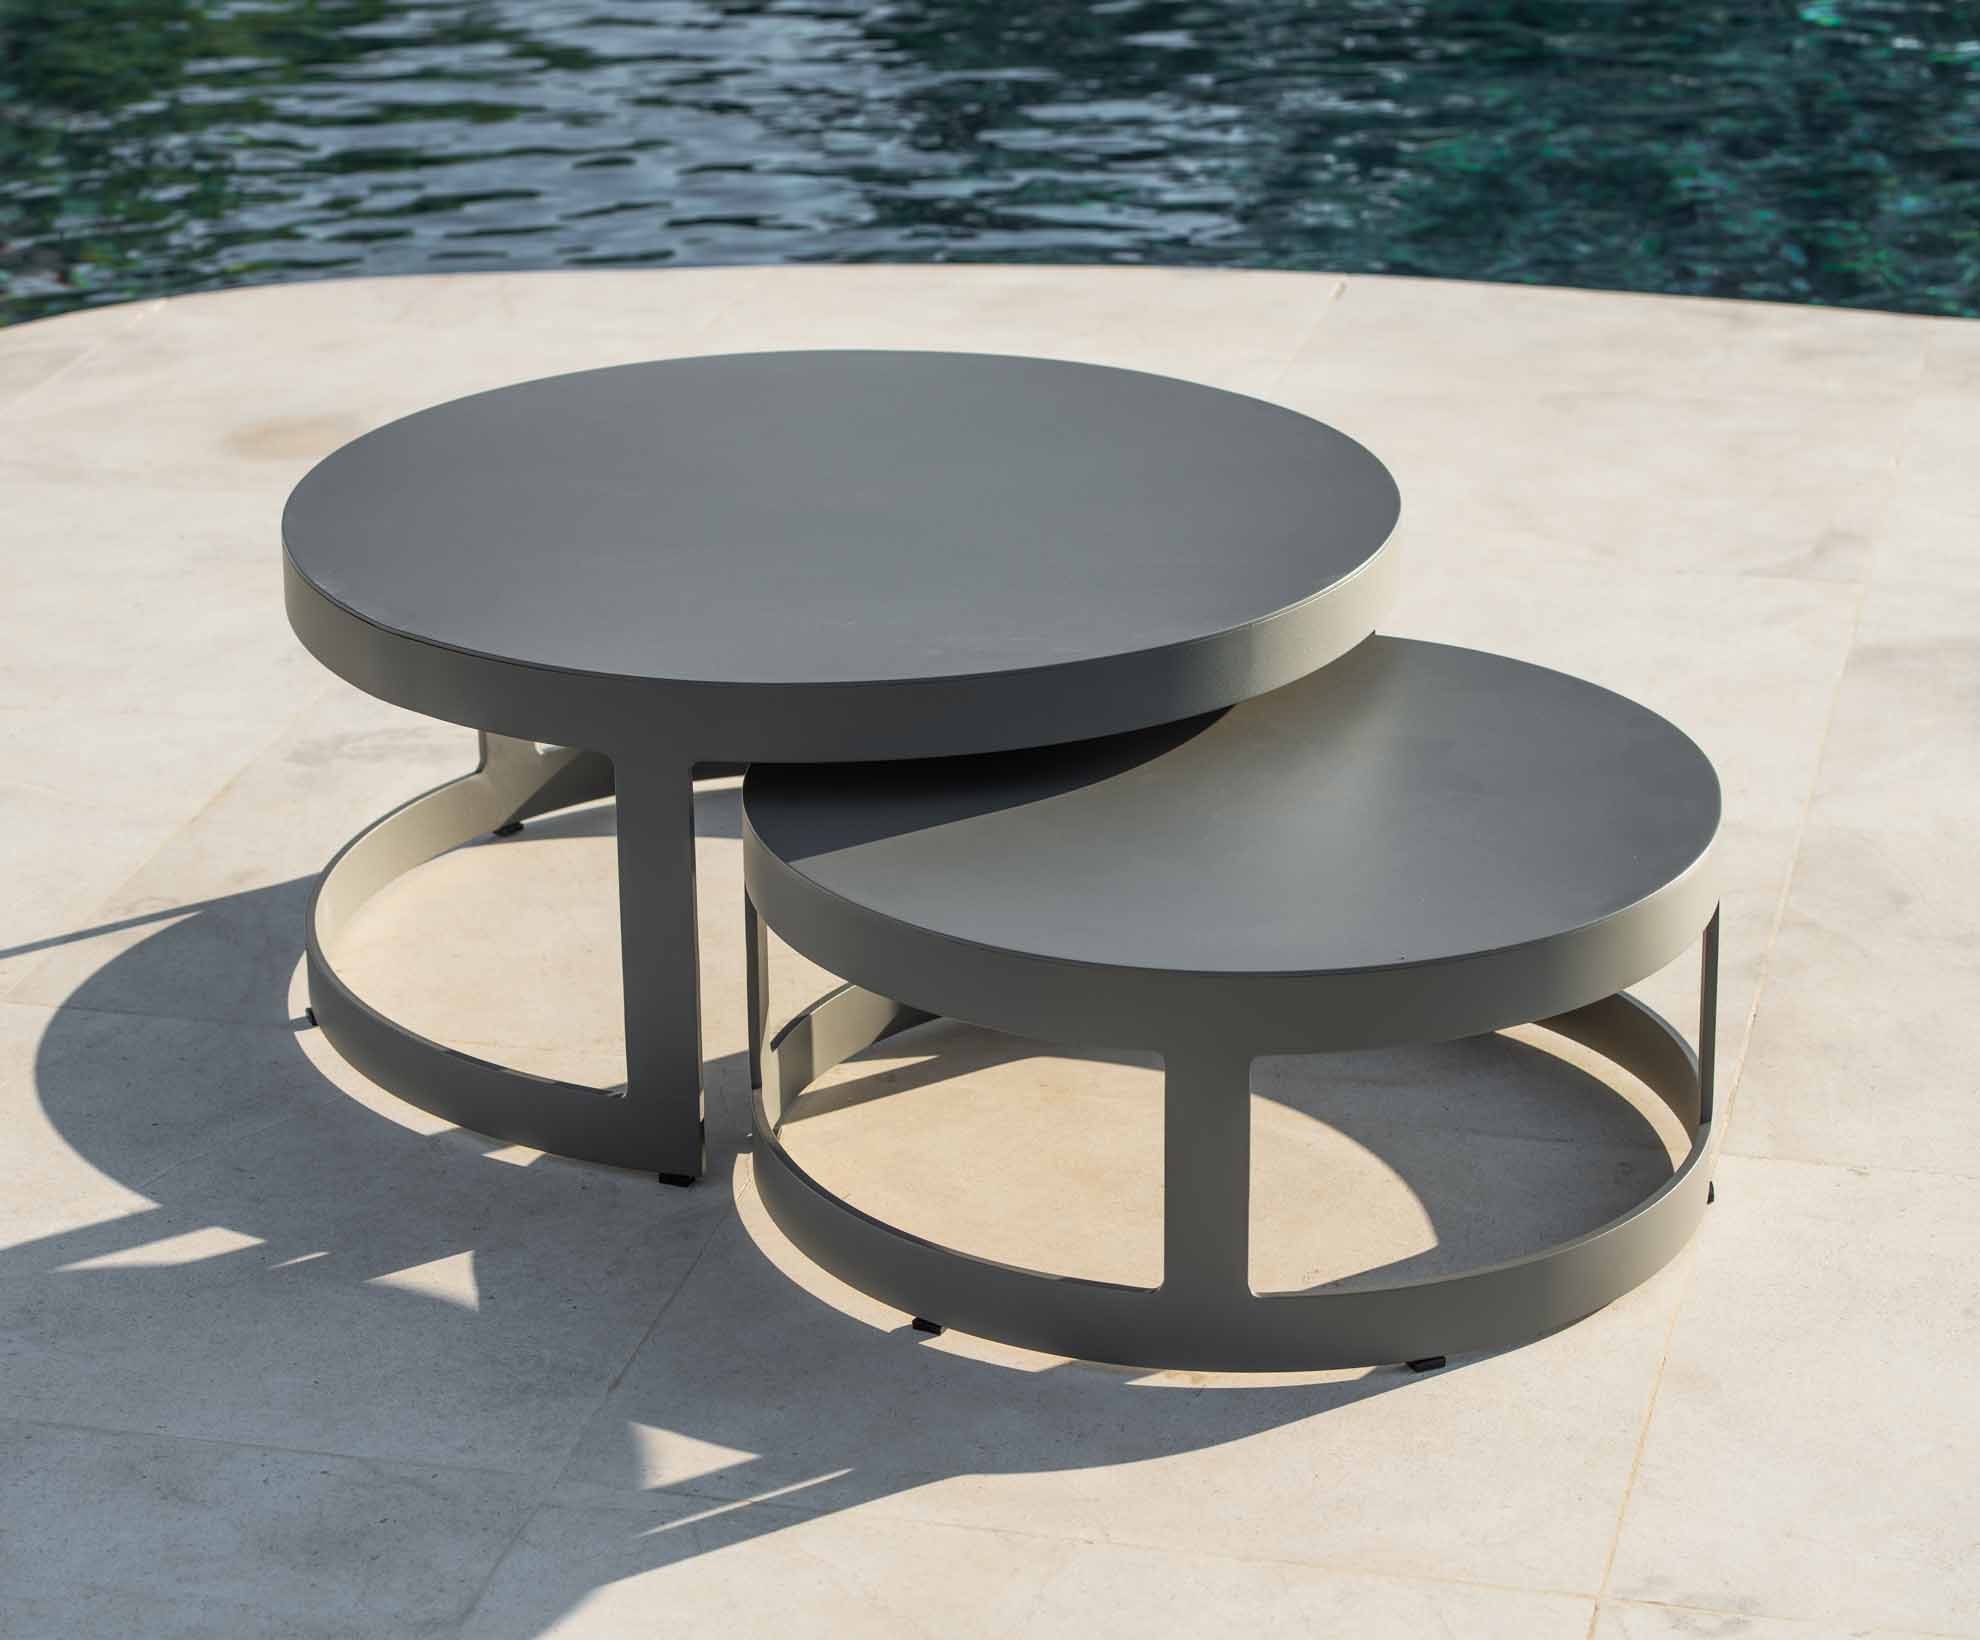 Aabu modren ceramic round coffee table luxury outdoor furniture contract hospitality